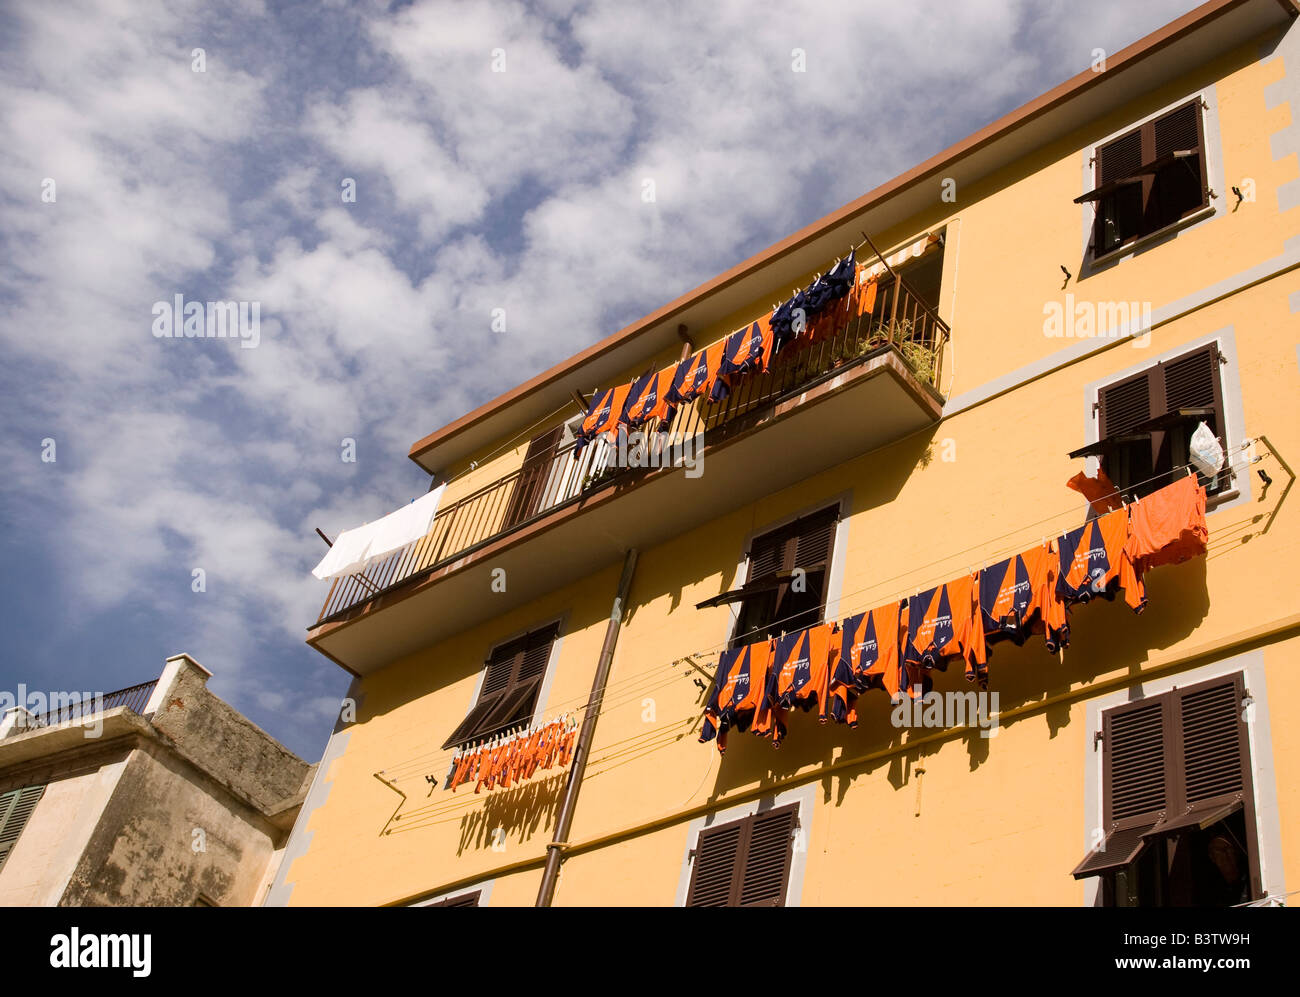 Europe, Italy, Cinque Terre, Riomaggiore. A sport team's uniforms hanging out to dry. Stock Photo